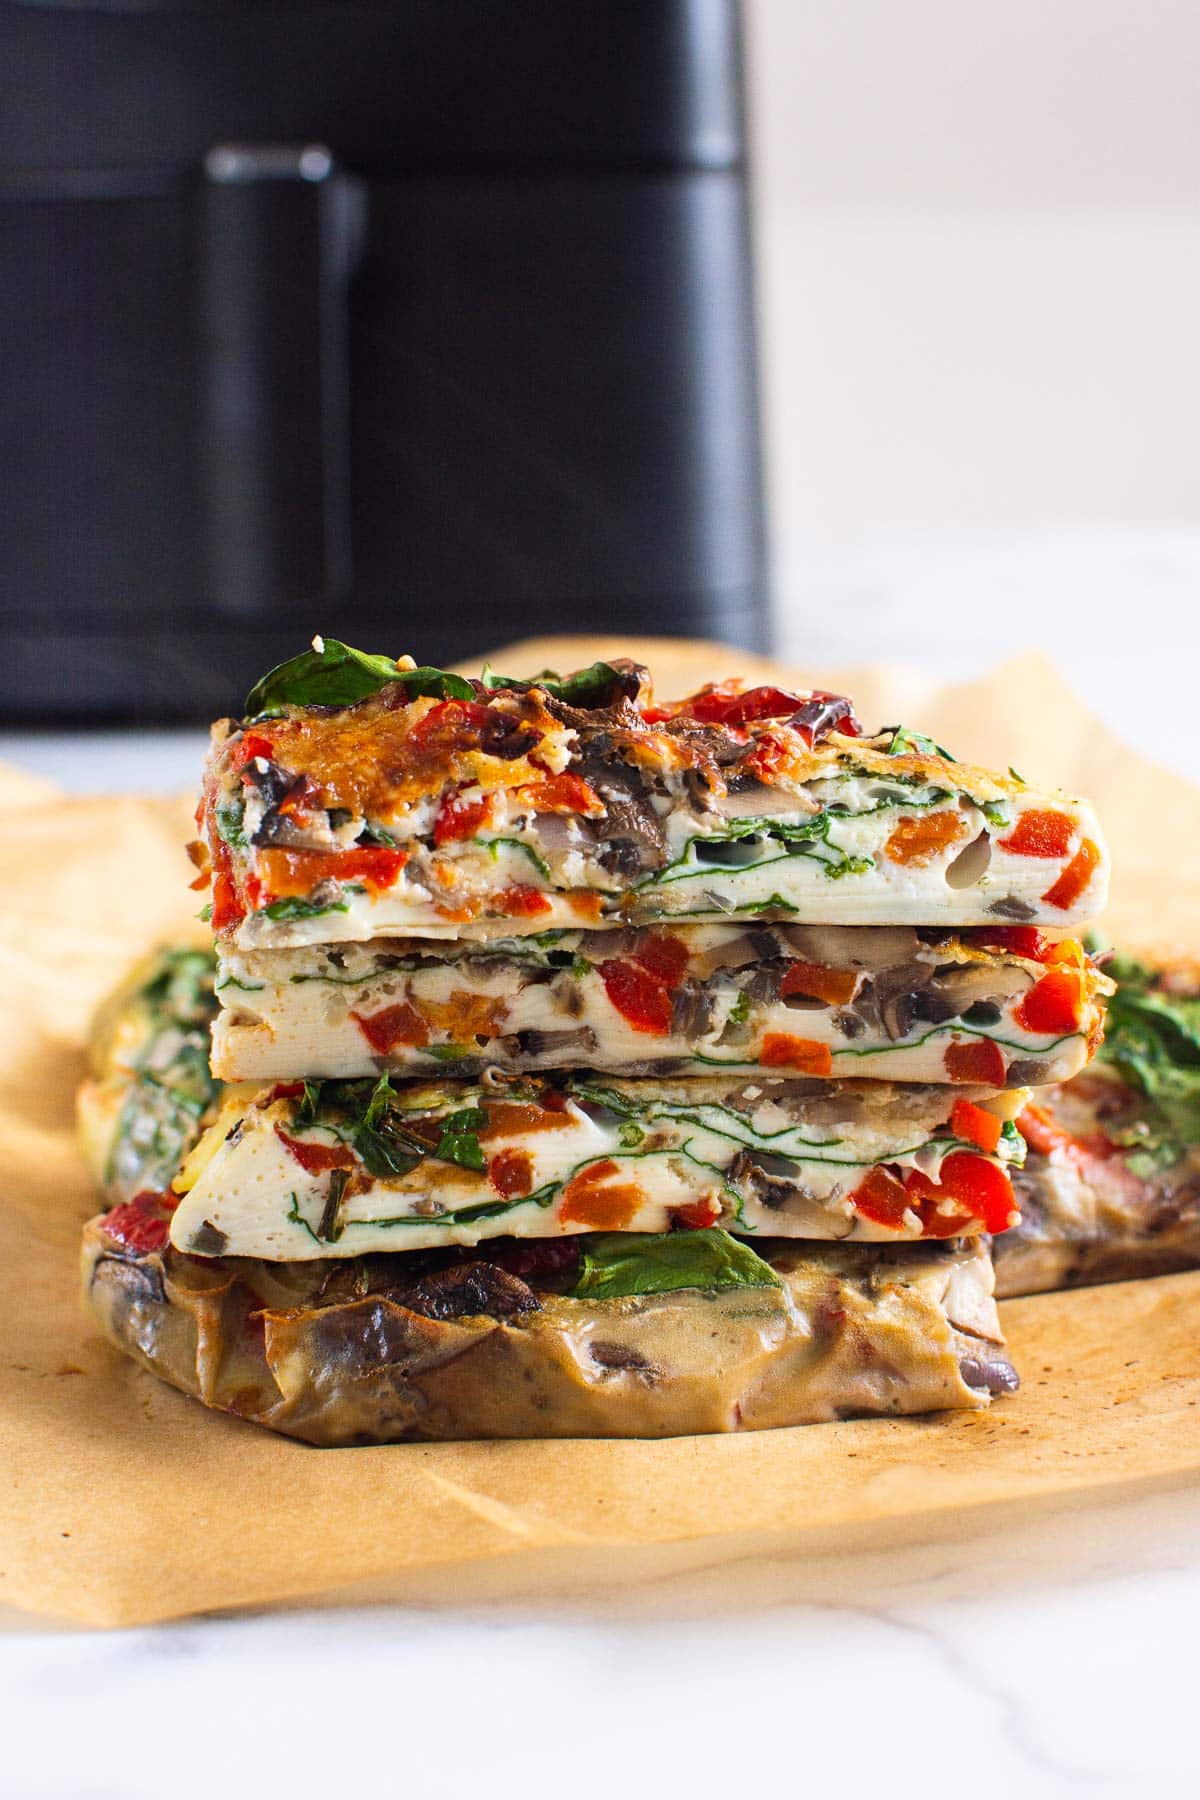 Stacked slices of breakfast casserole with spinach, pepper and mushrooms.